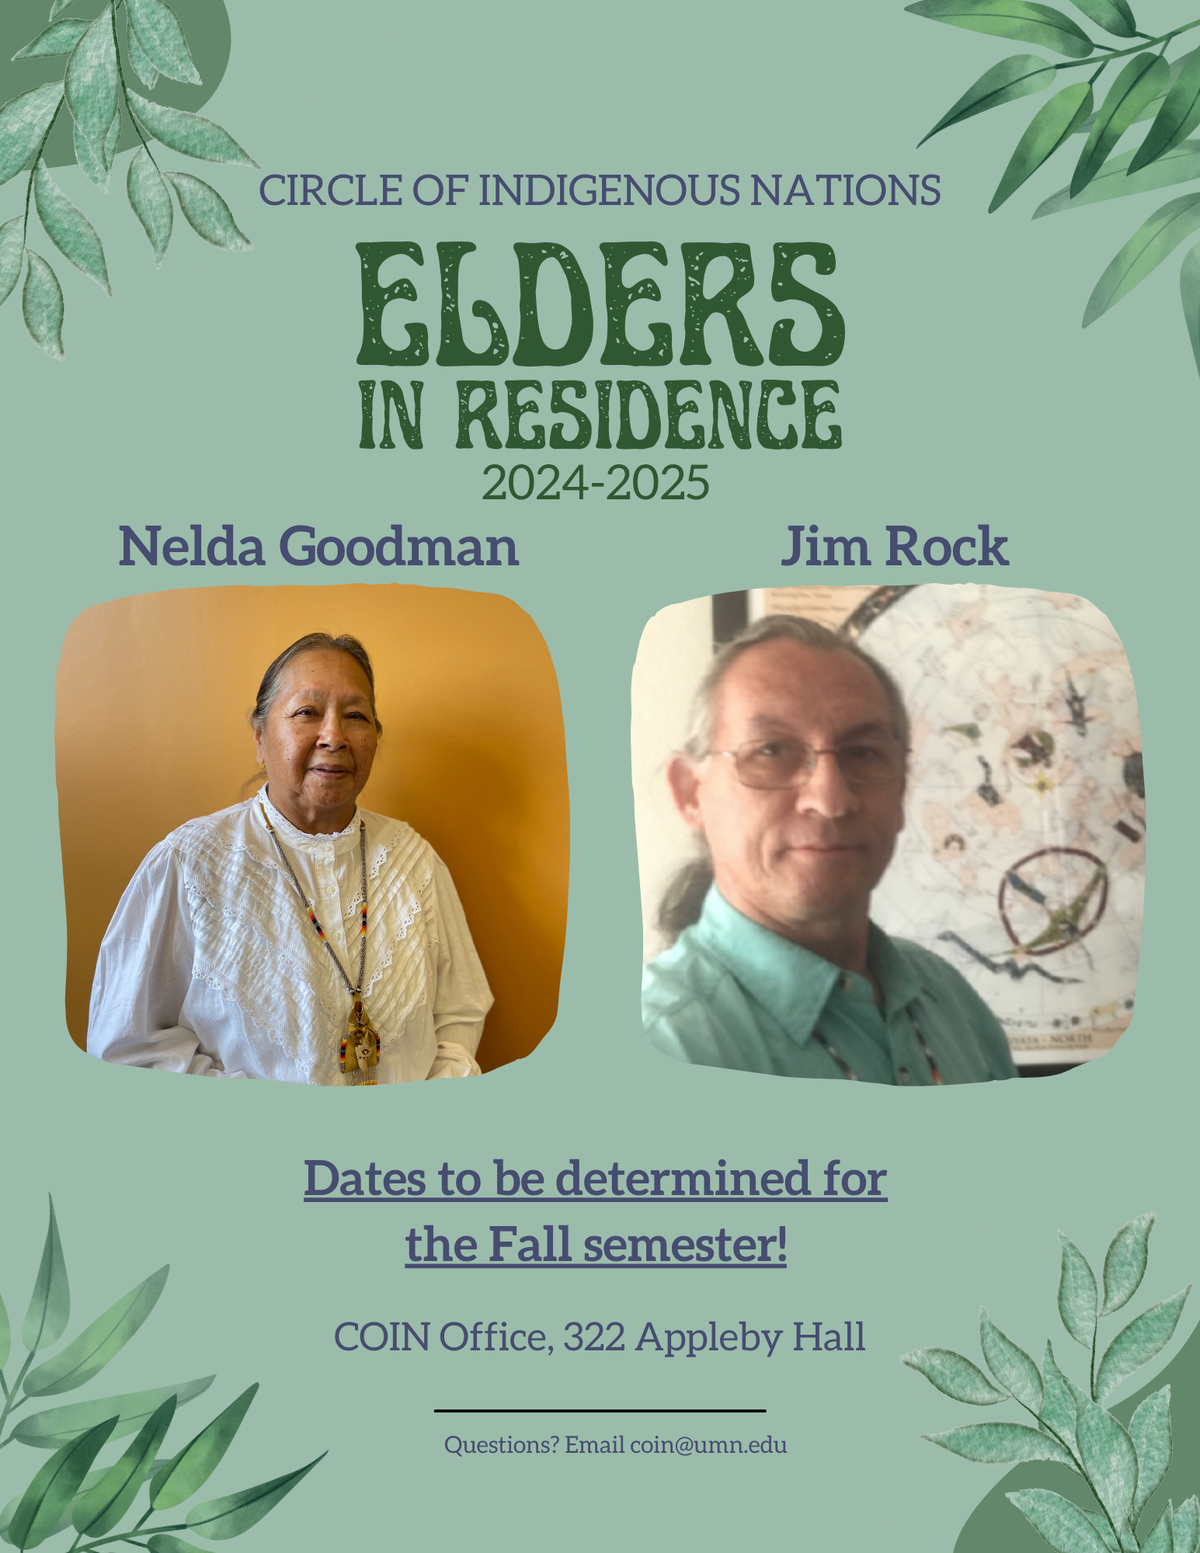 Elders in Residence 2024-2025: Nelda Goodman and Jim Rock. Dates to be determined for the fall Semester; programming will be in the COIN Office, 322 Appleby Hall